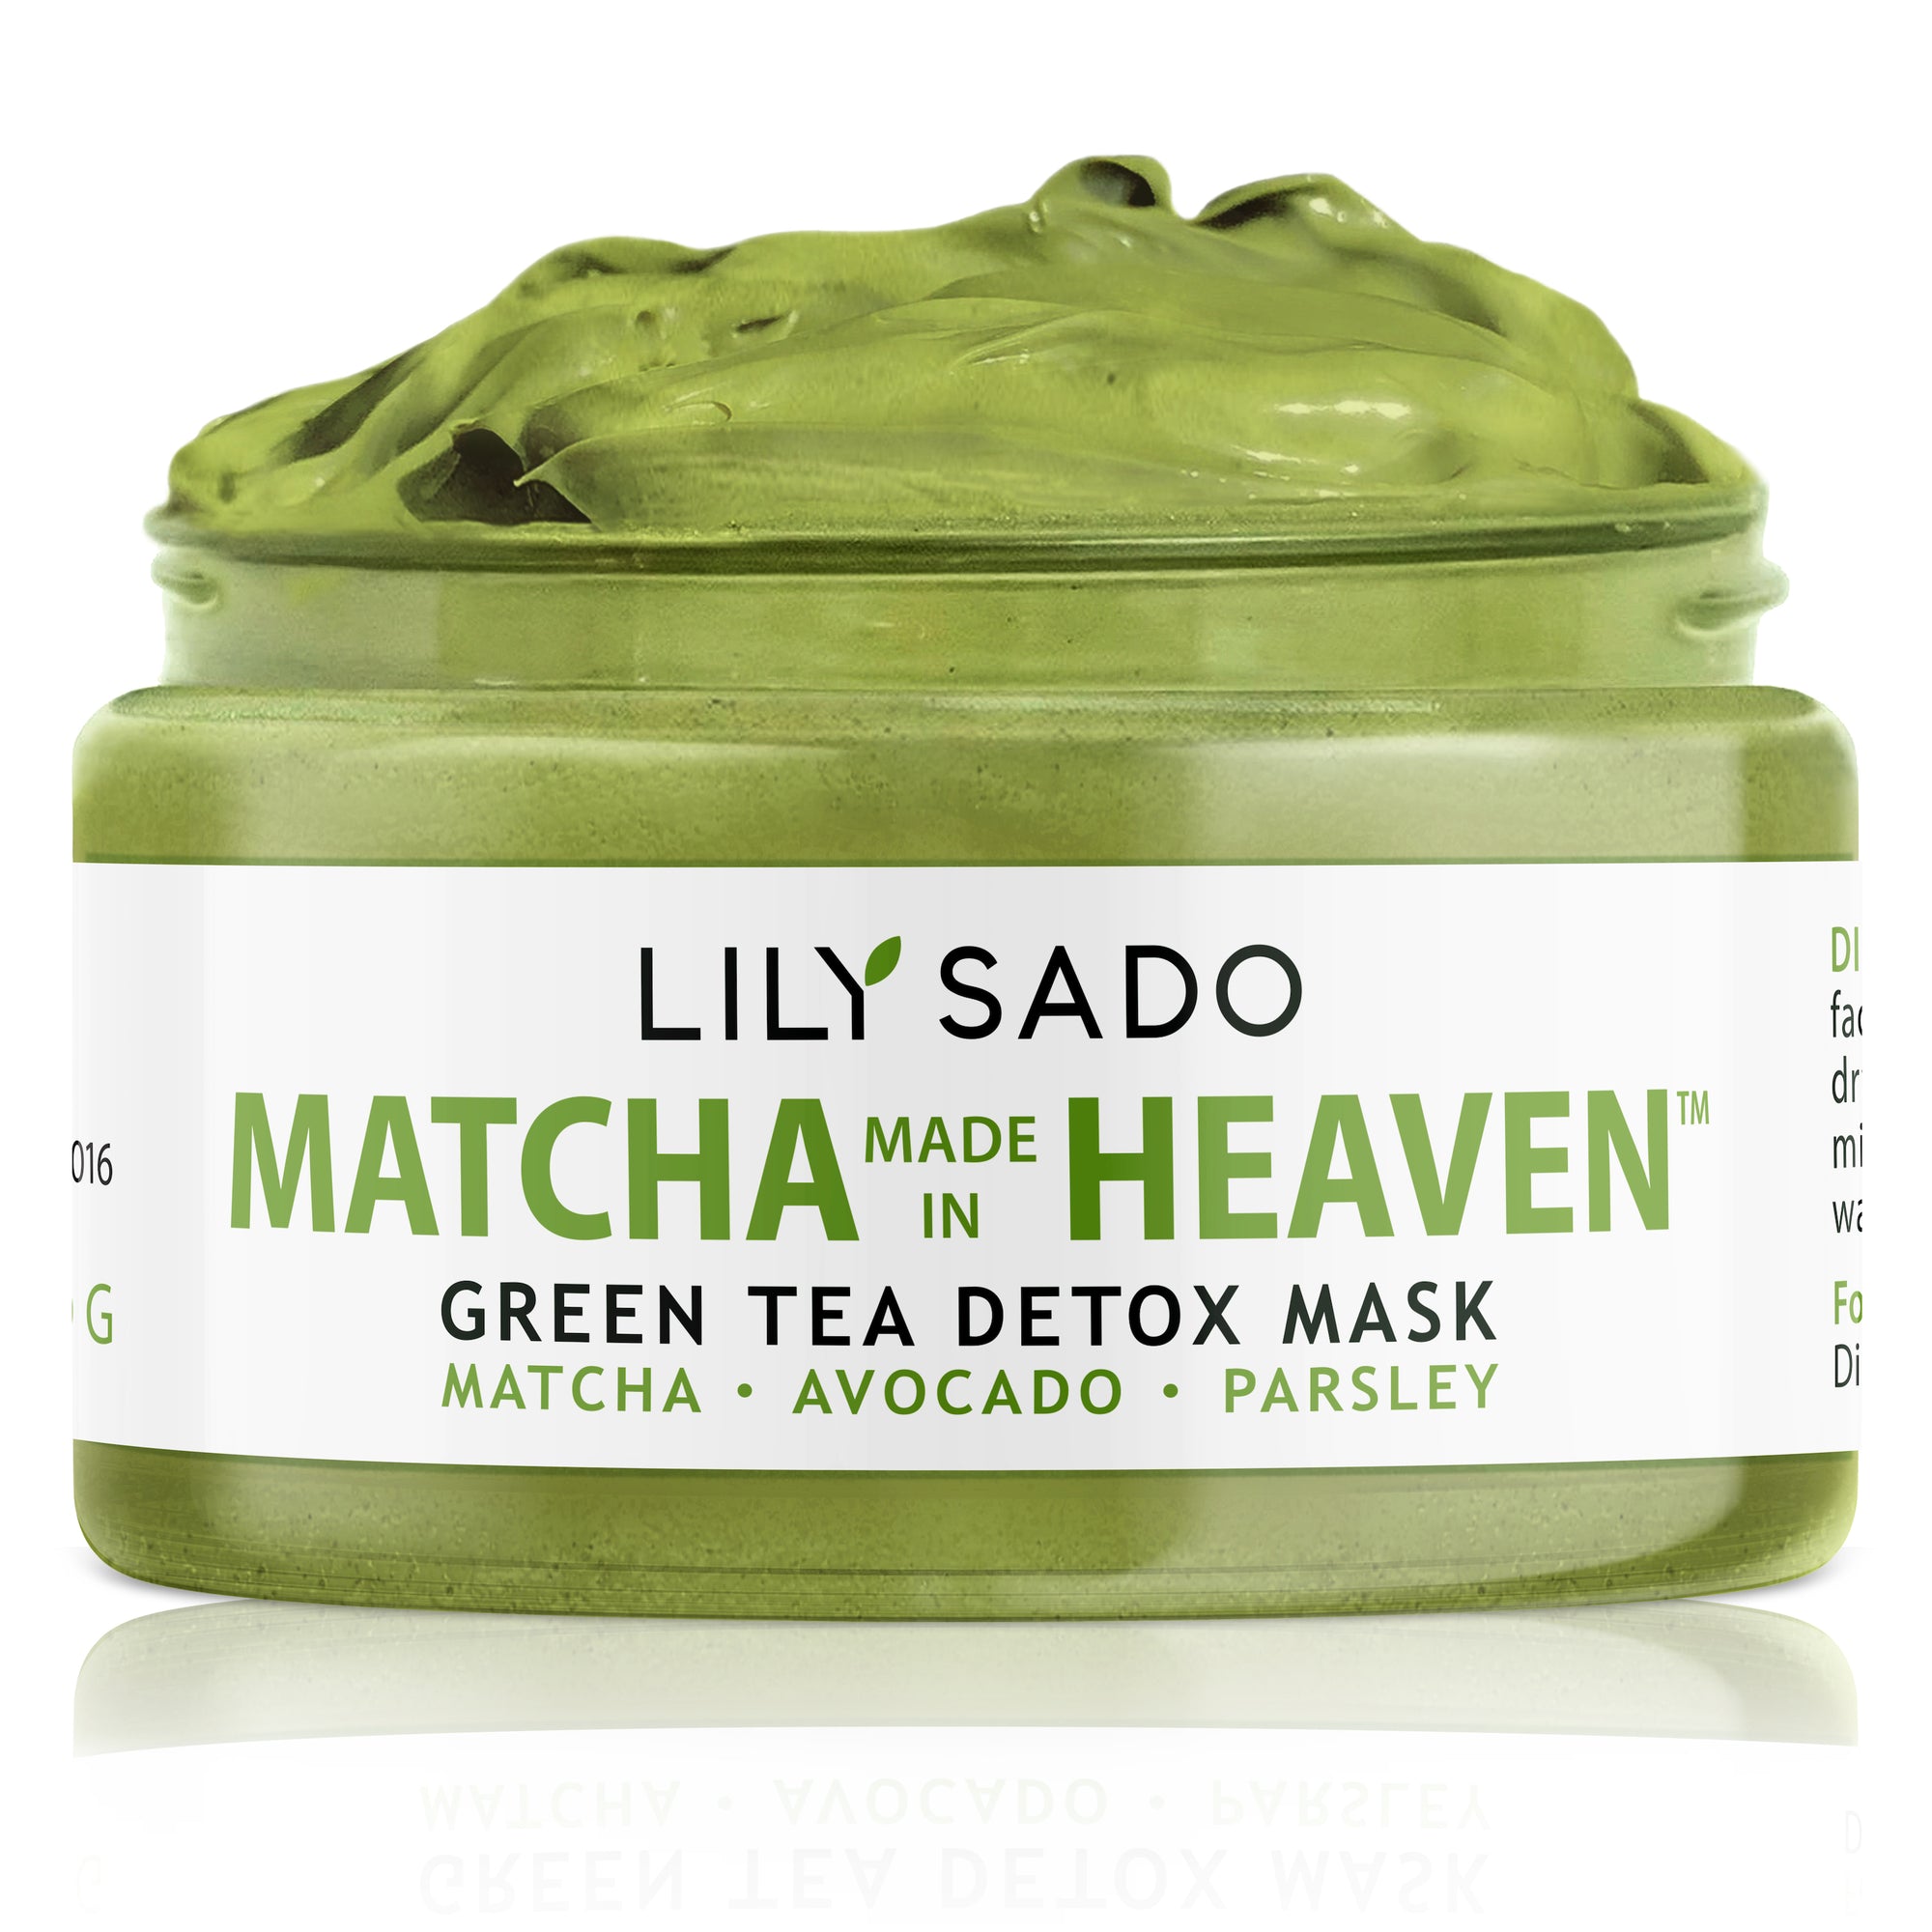 LILY SADO Green Tea Face Mask - Organic Natural VEGAN Facial Mask - Anti-Aging, Antioxidant Defense Against Acne, Blackheads & Wrinkles for a Luscious, Soft Glowing Complexion - Best Mud Mask for Acne Green Tea Matcha